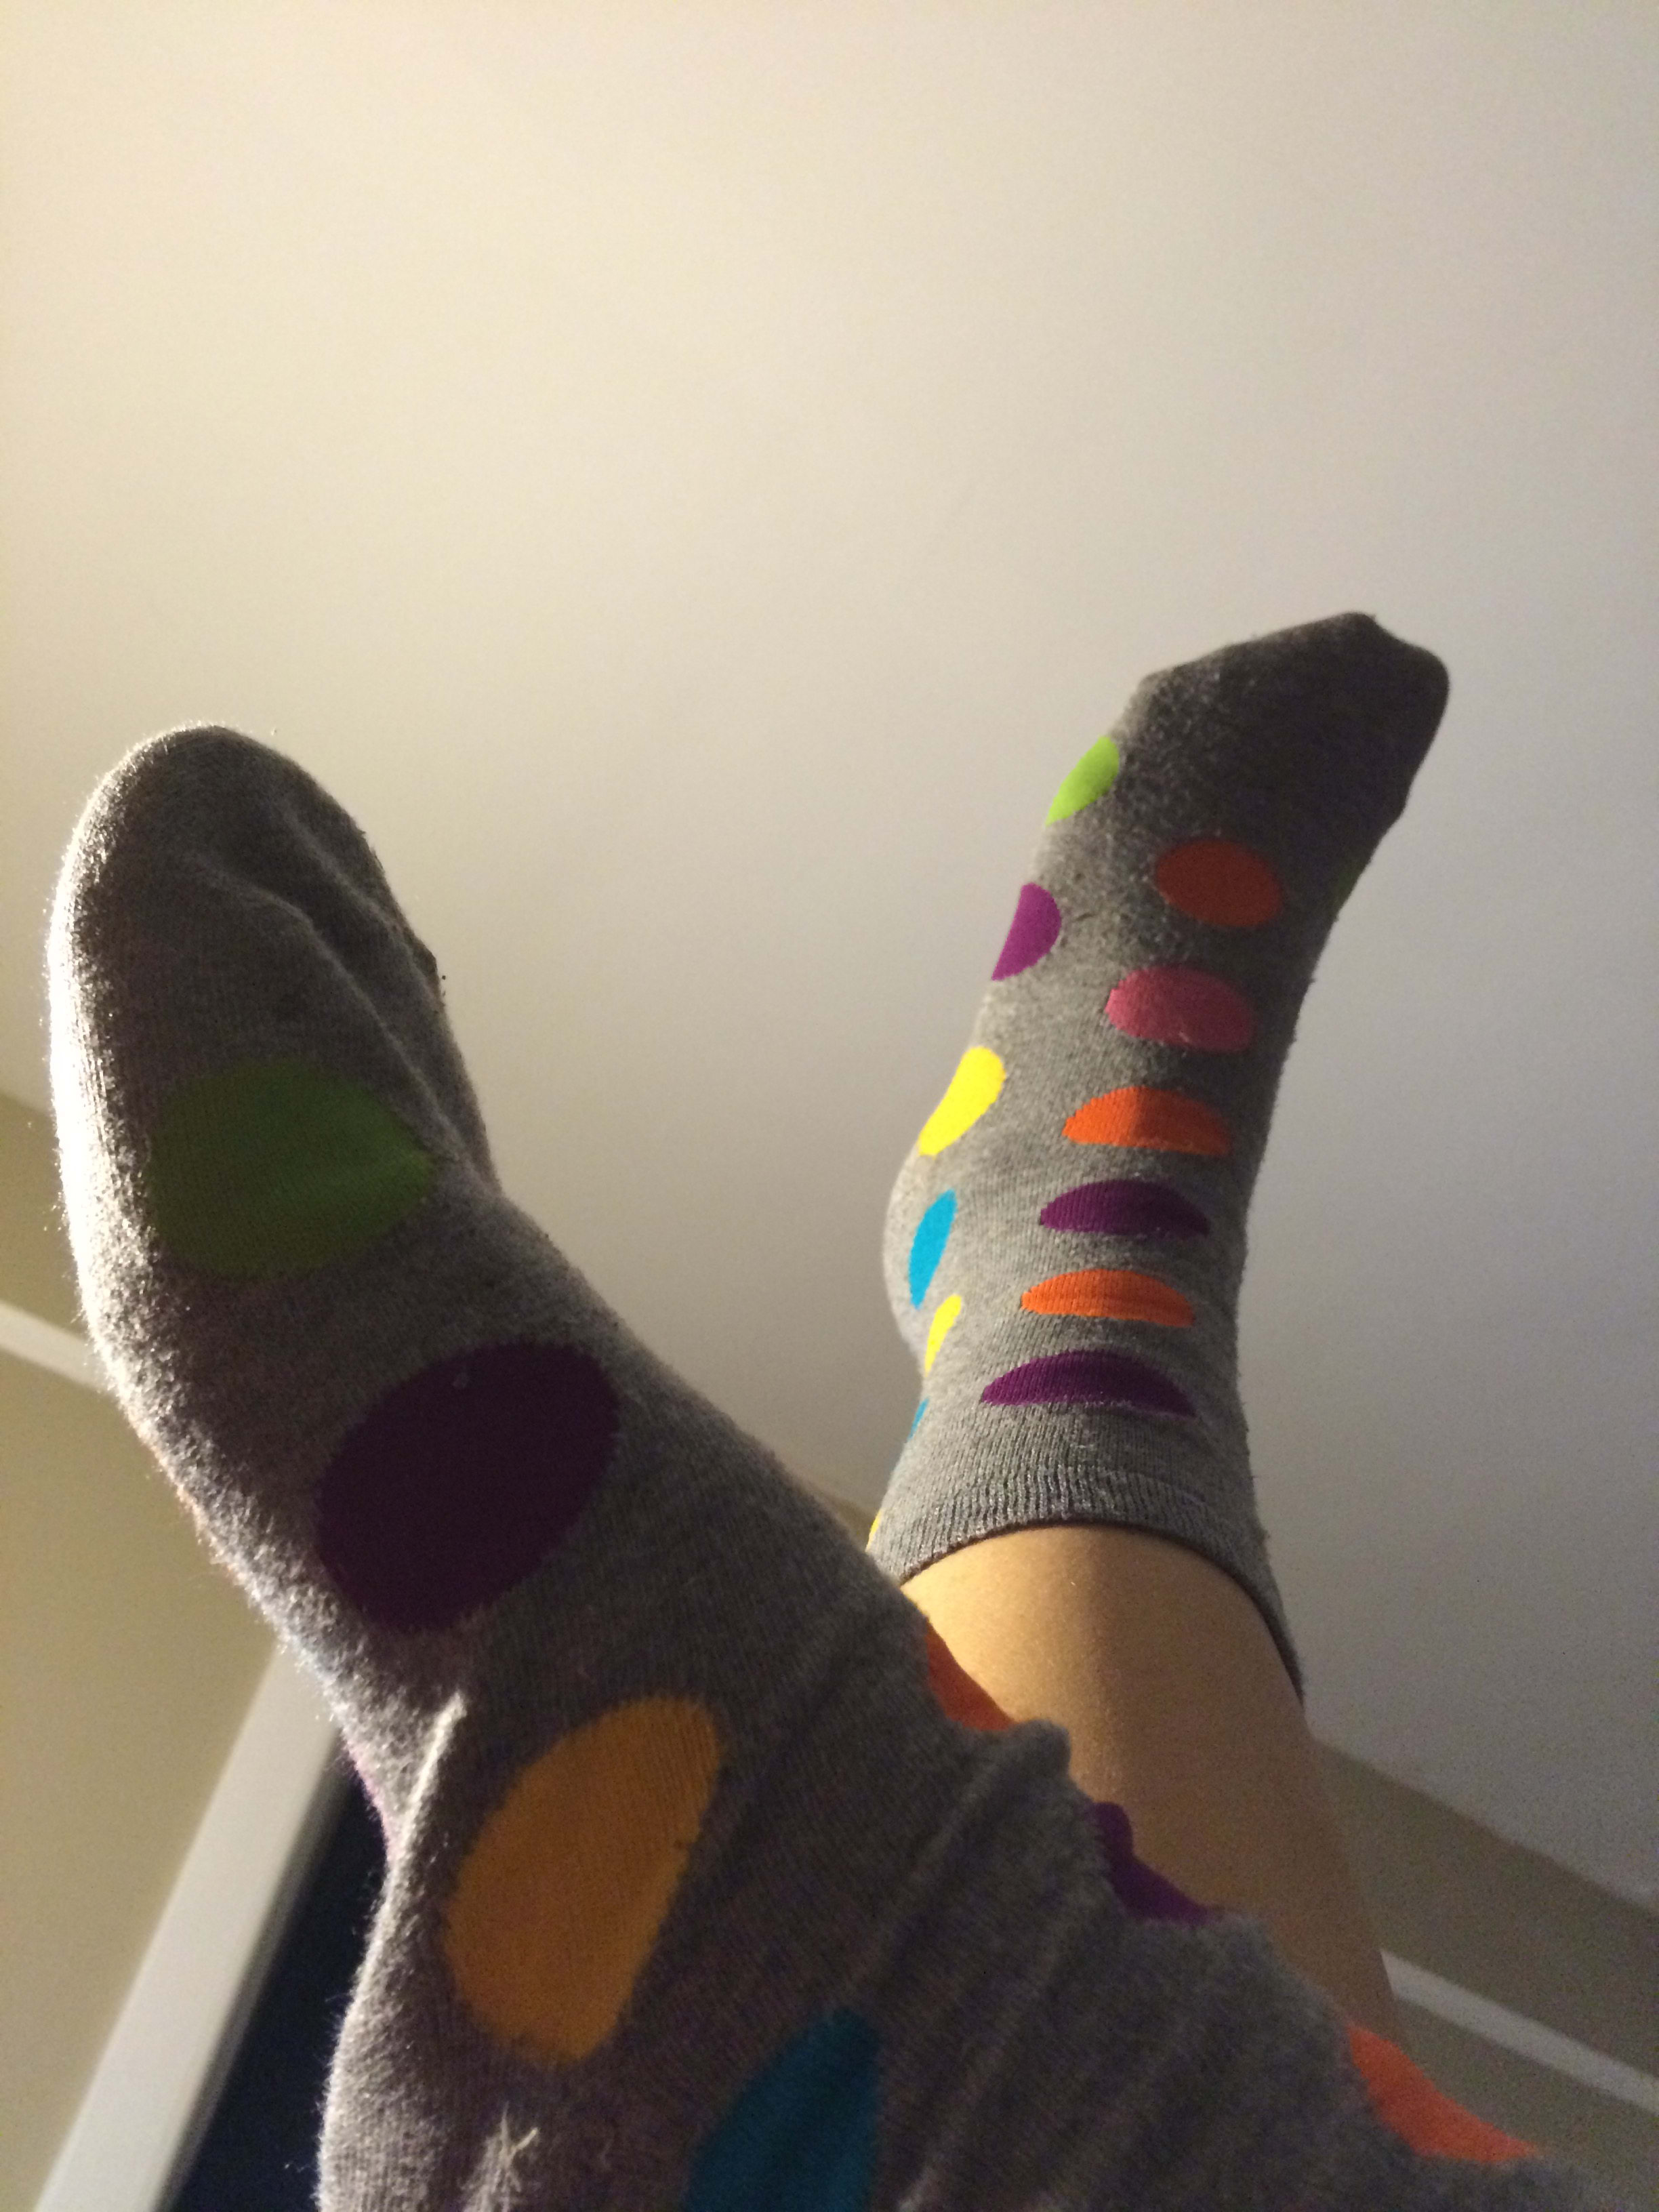 https://fiverr-res.cloudinary.com/images/q_auto,f_auto/gigs/5972853/original/IMG_6861/sell-you-pictures-of-my-feet-in-cute-socks.JPG